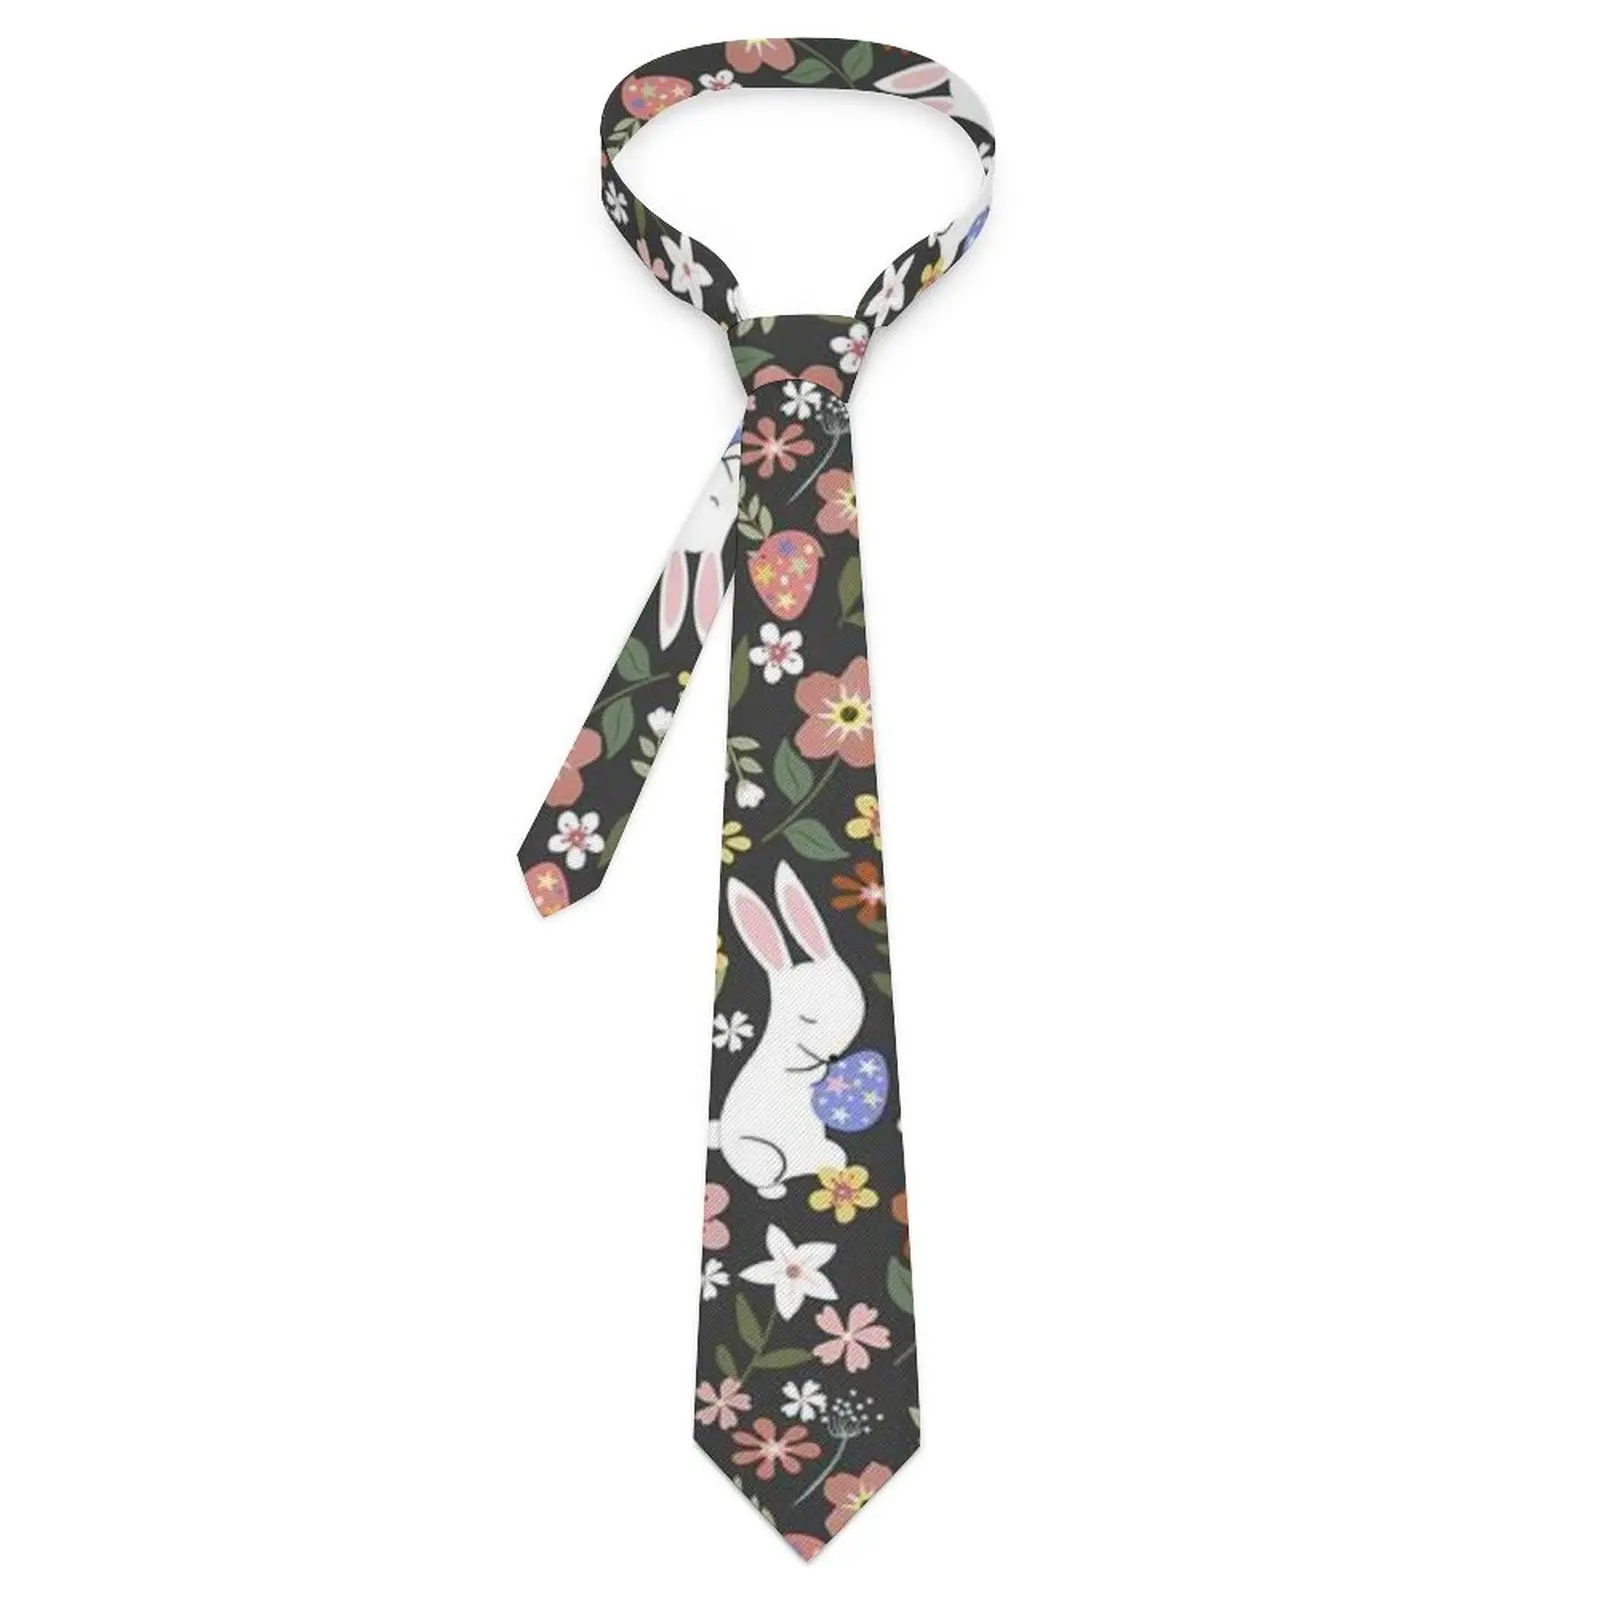 

Easter Day Floral Tie Rabbit Print Novelty Casual Neck Ties For Male Cosplay Party Quality Collar Tie Design Necktie Accessories